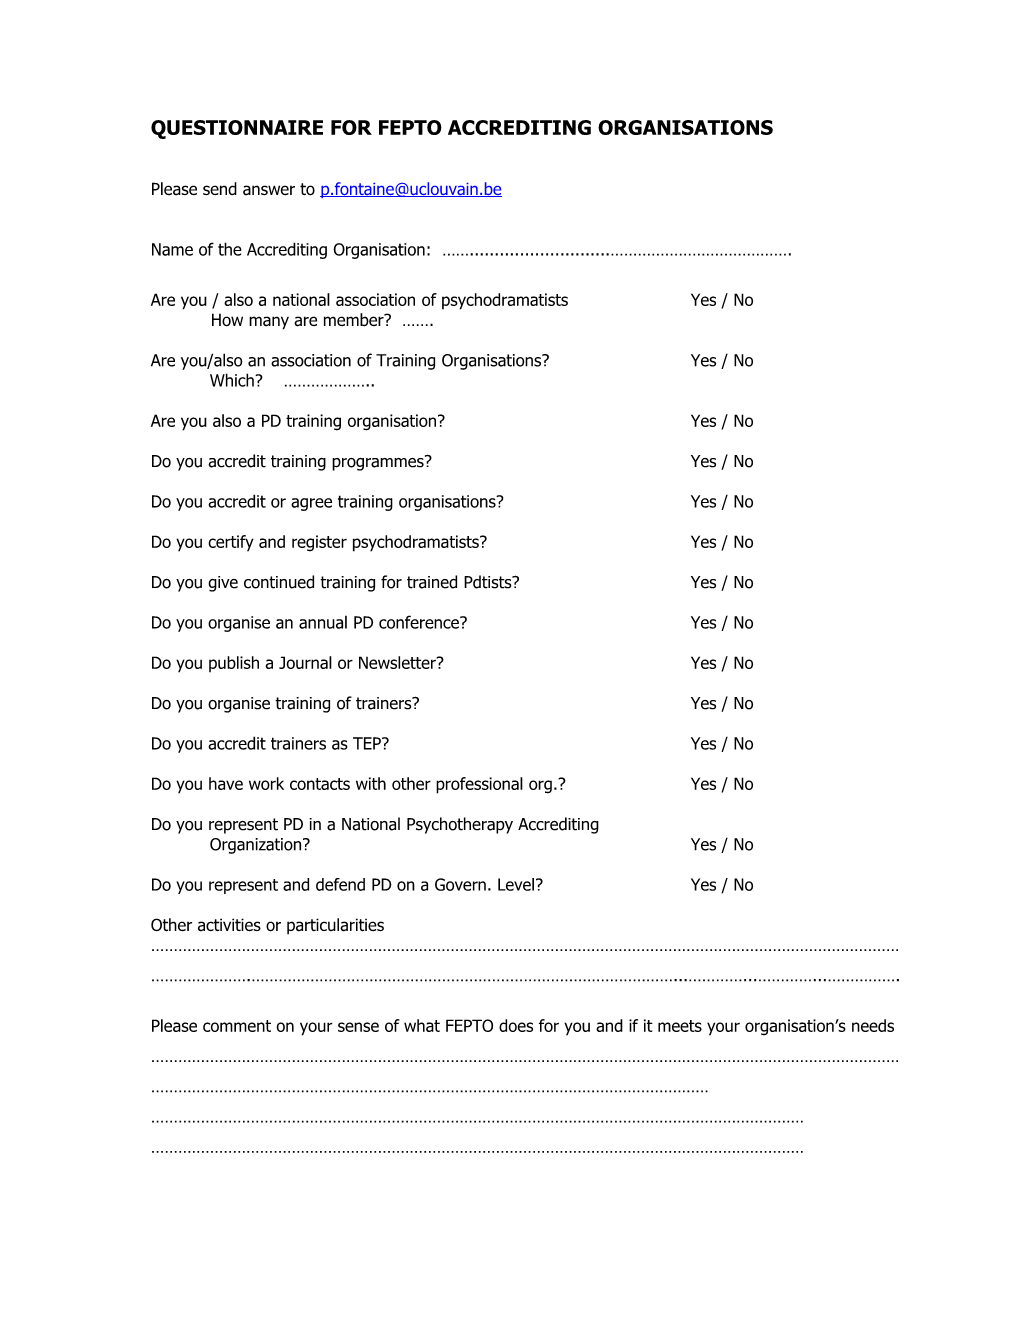 Questionnaire for Fepto Accrediting Organisations